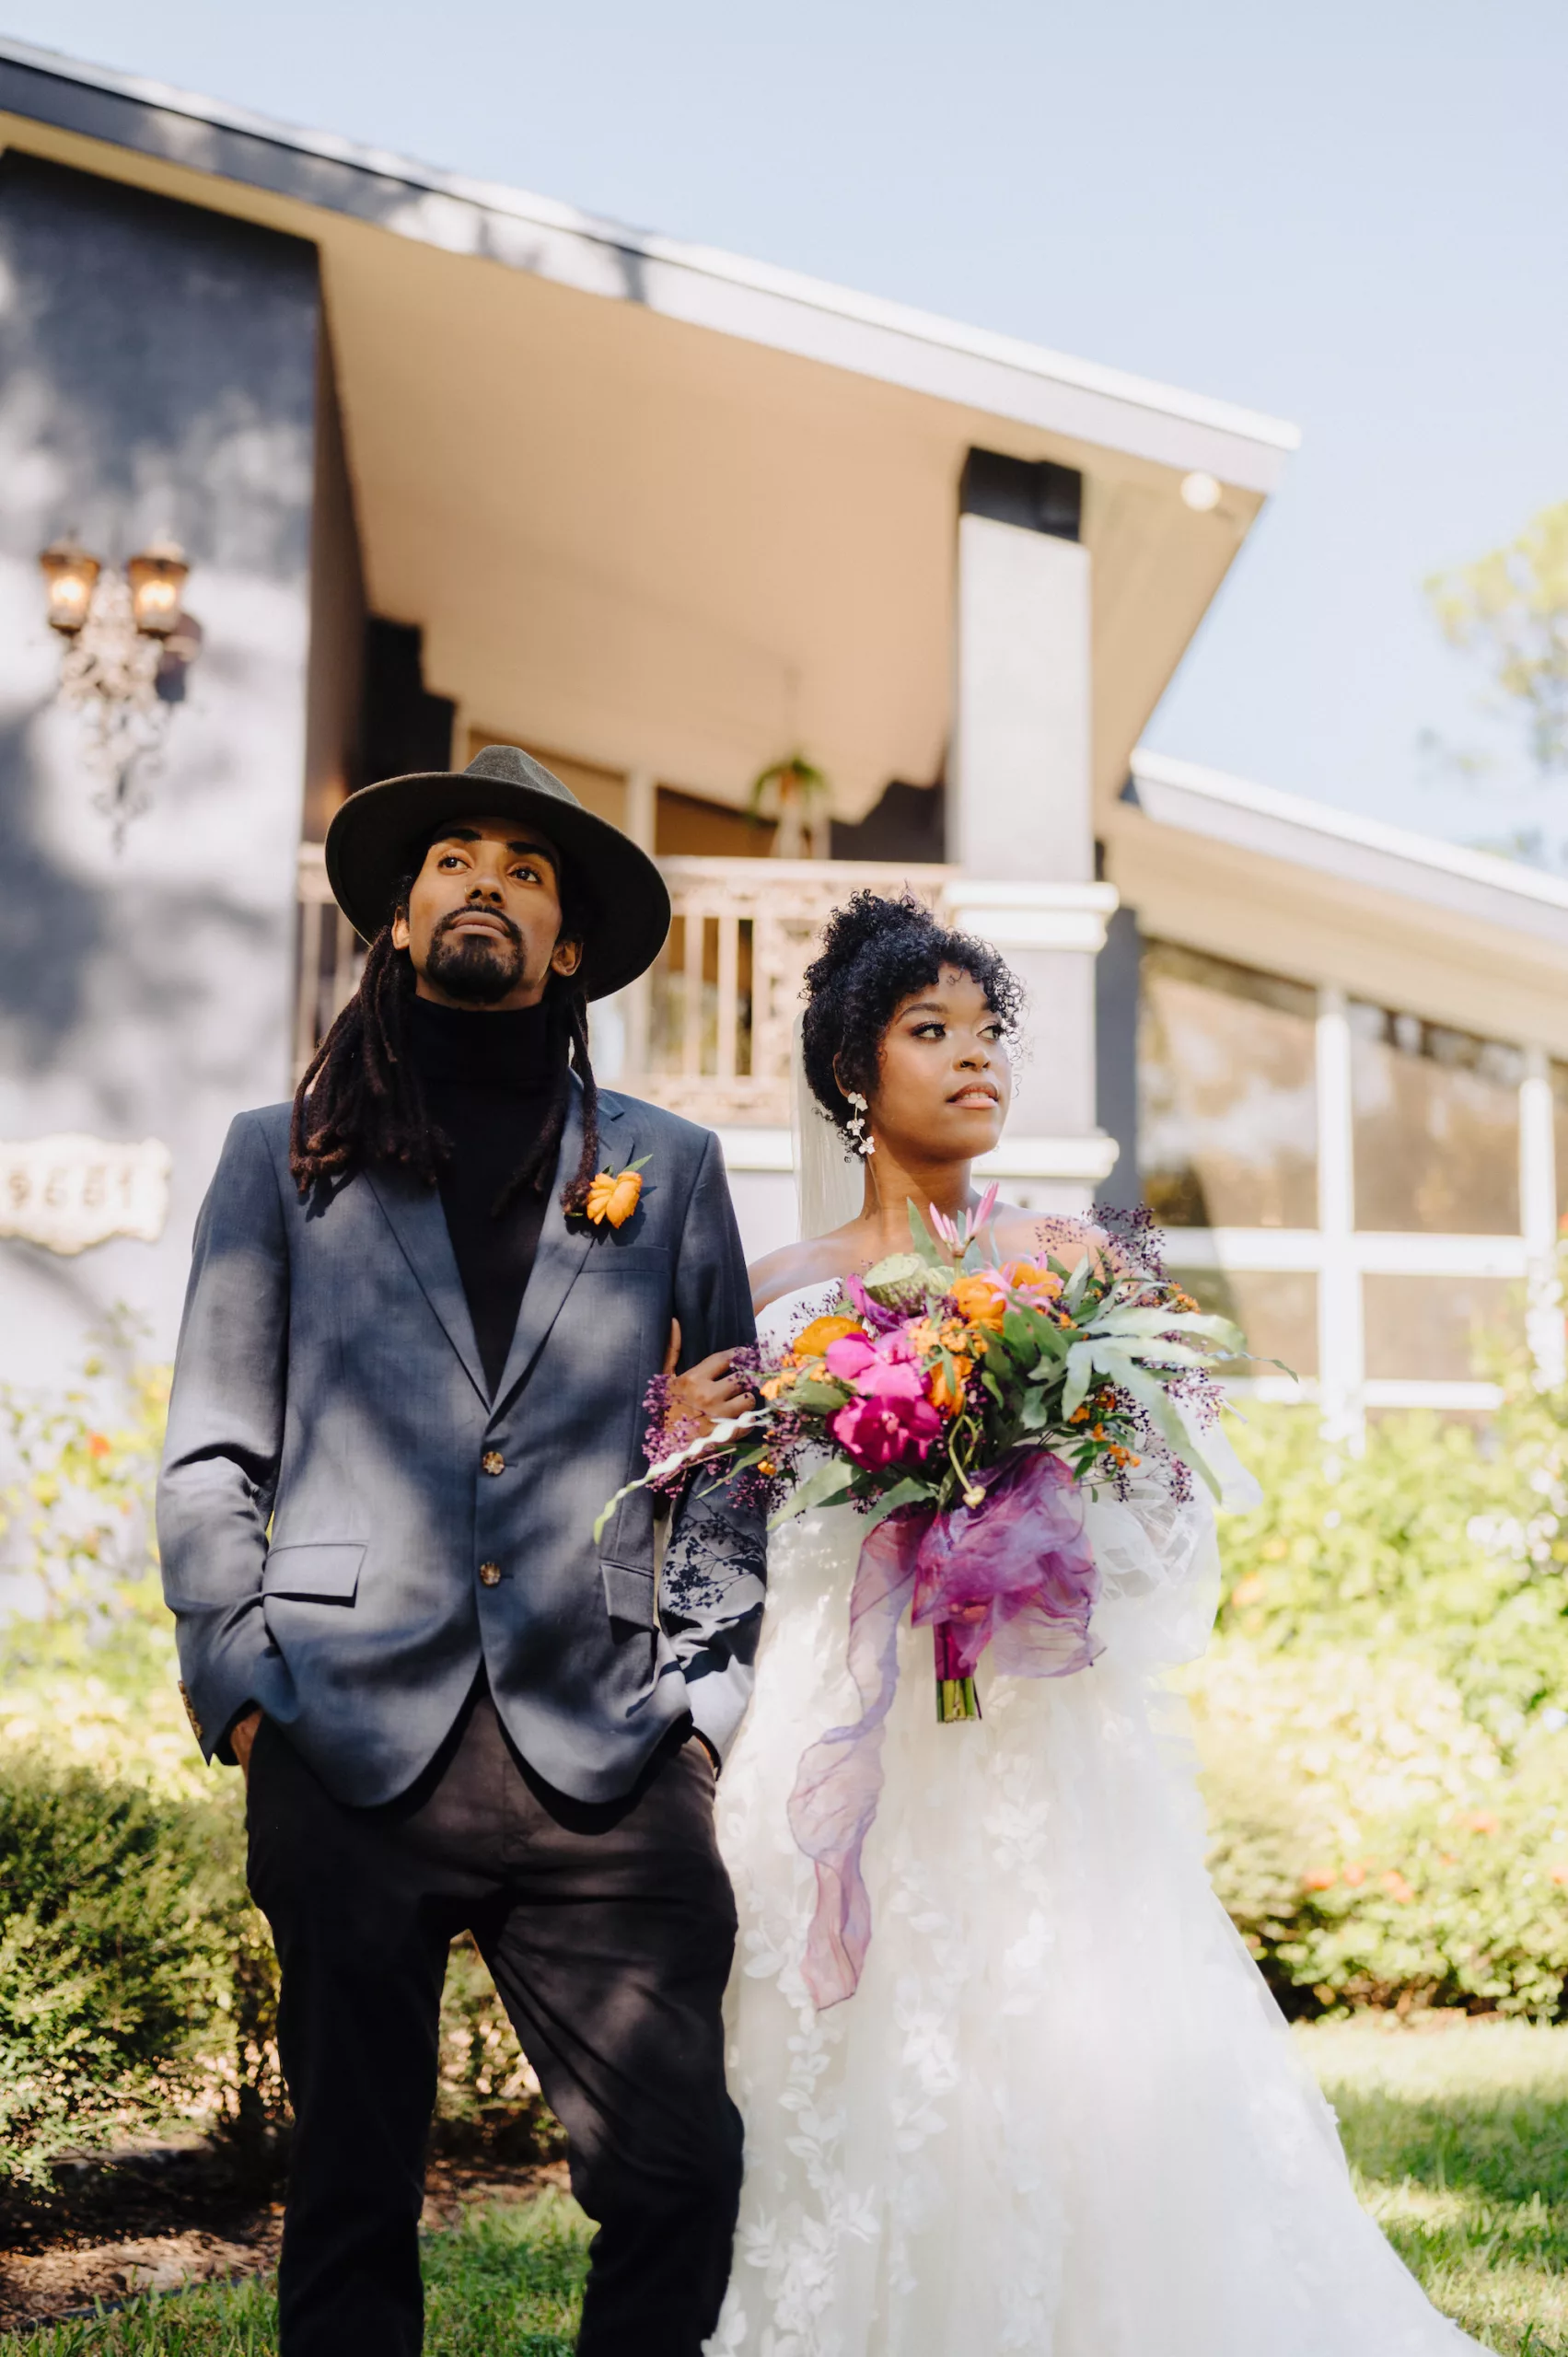 Bride and Groom First Look Wedding Portrait | Tampa Bay Photographer McNeile Photography | Content Creators Behind The Vows | Planner Wilder Mind Events